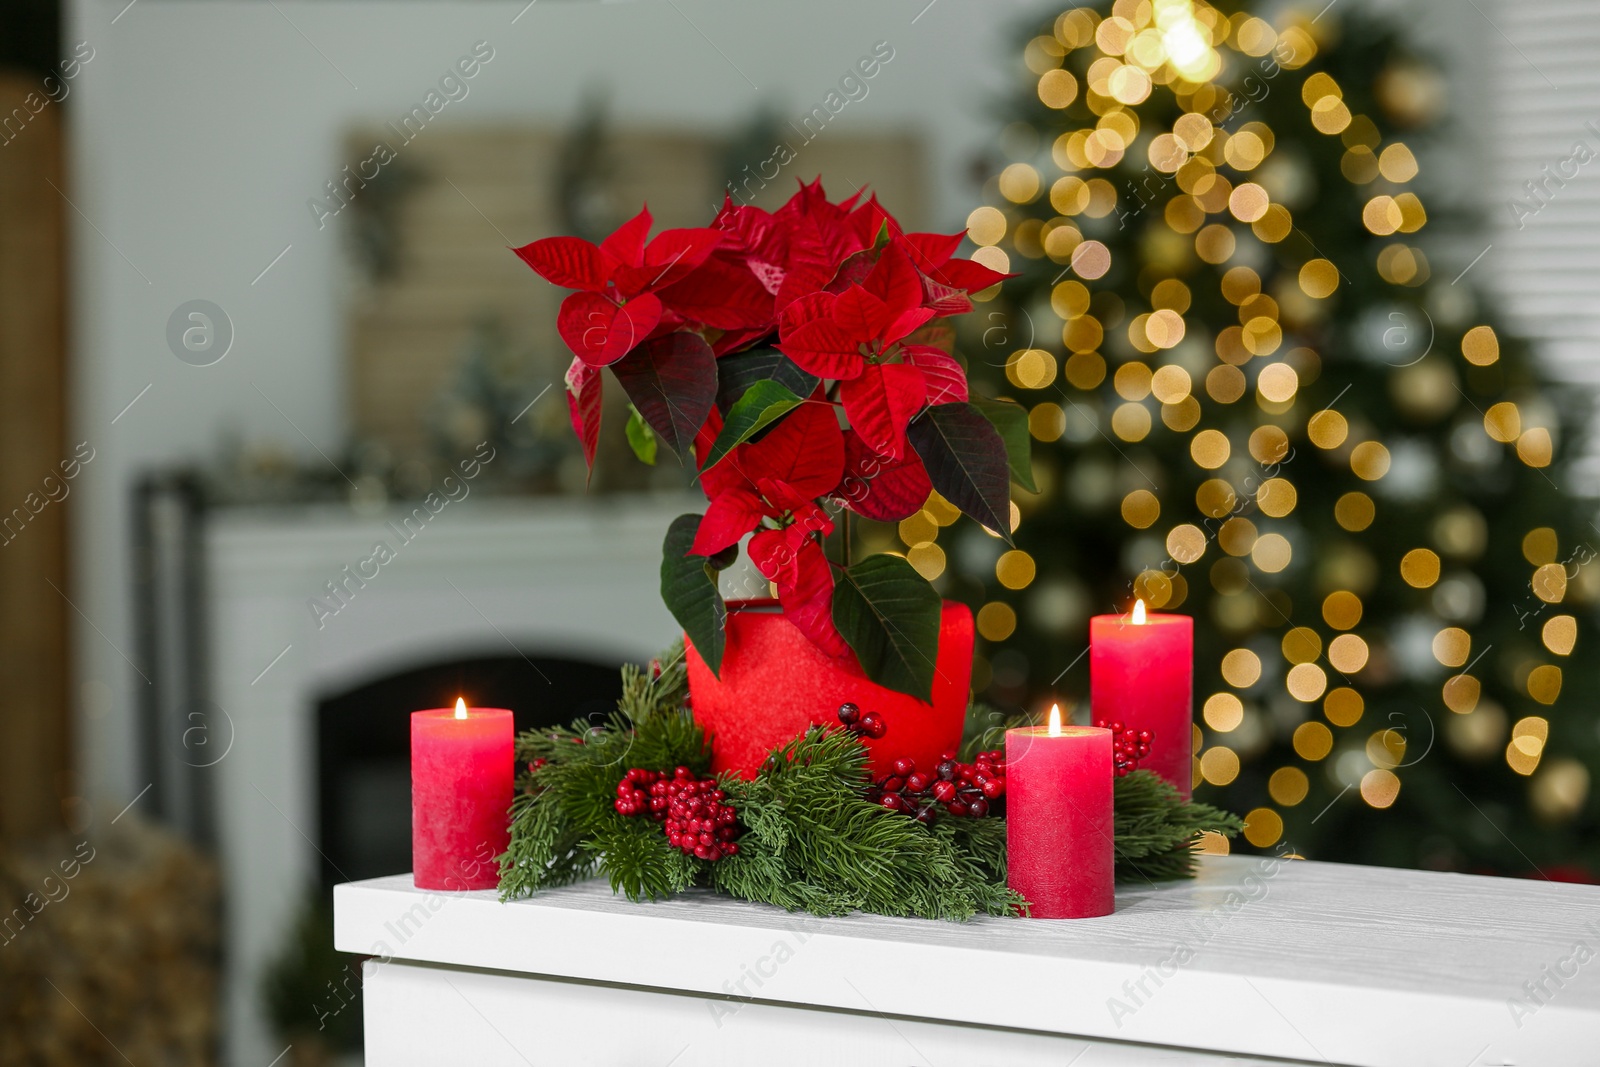 Photo of Potted poinsettia, burning candles and festive decor on white dresser in room. Christmas traditional flower